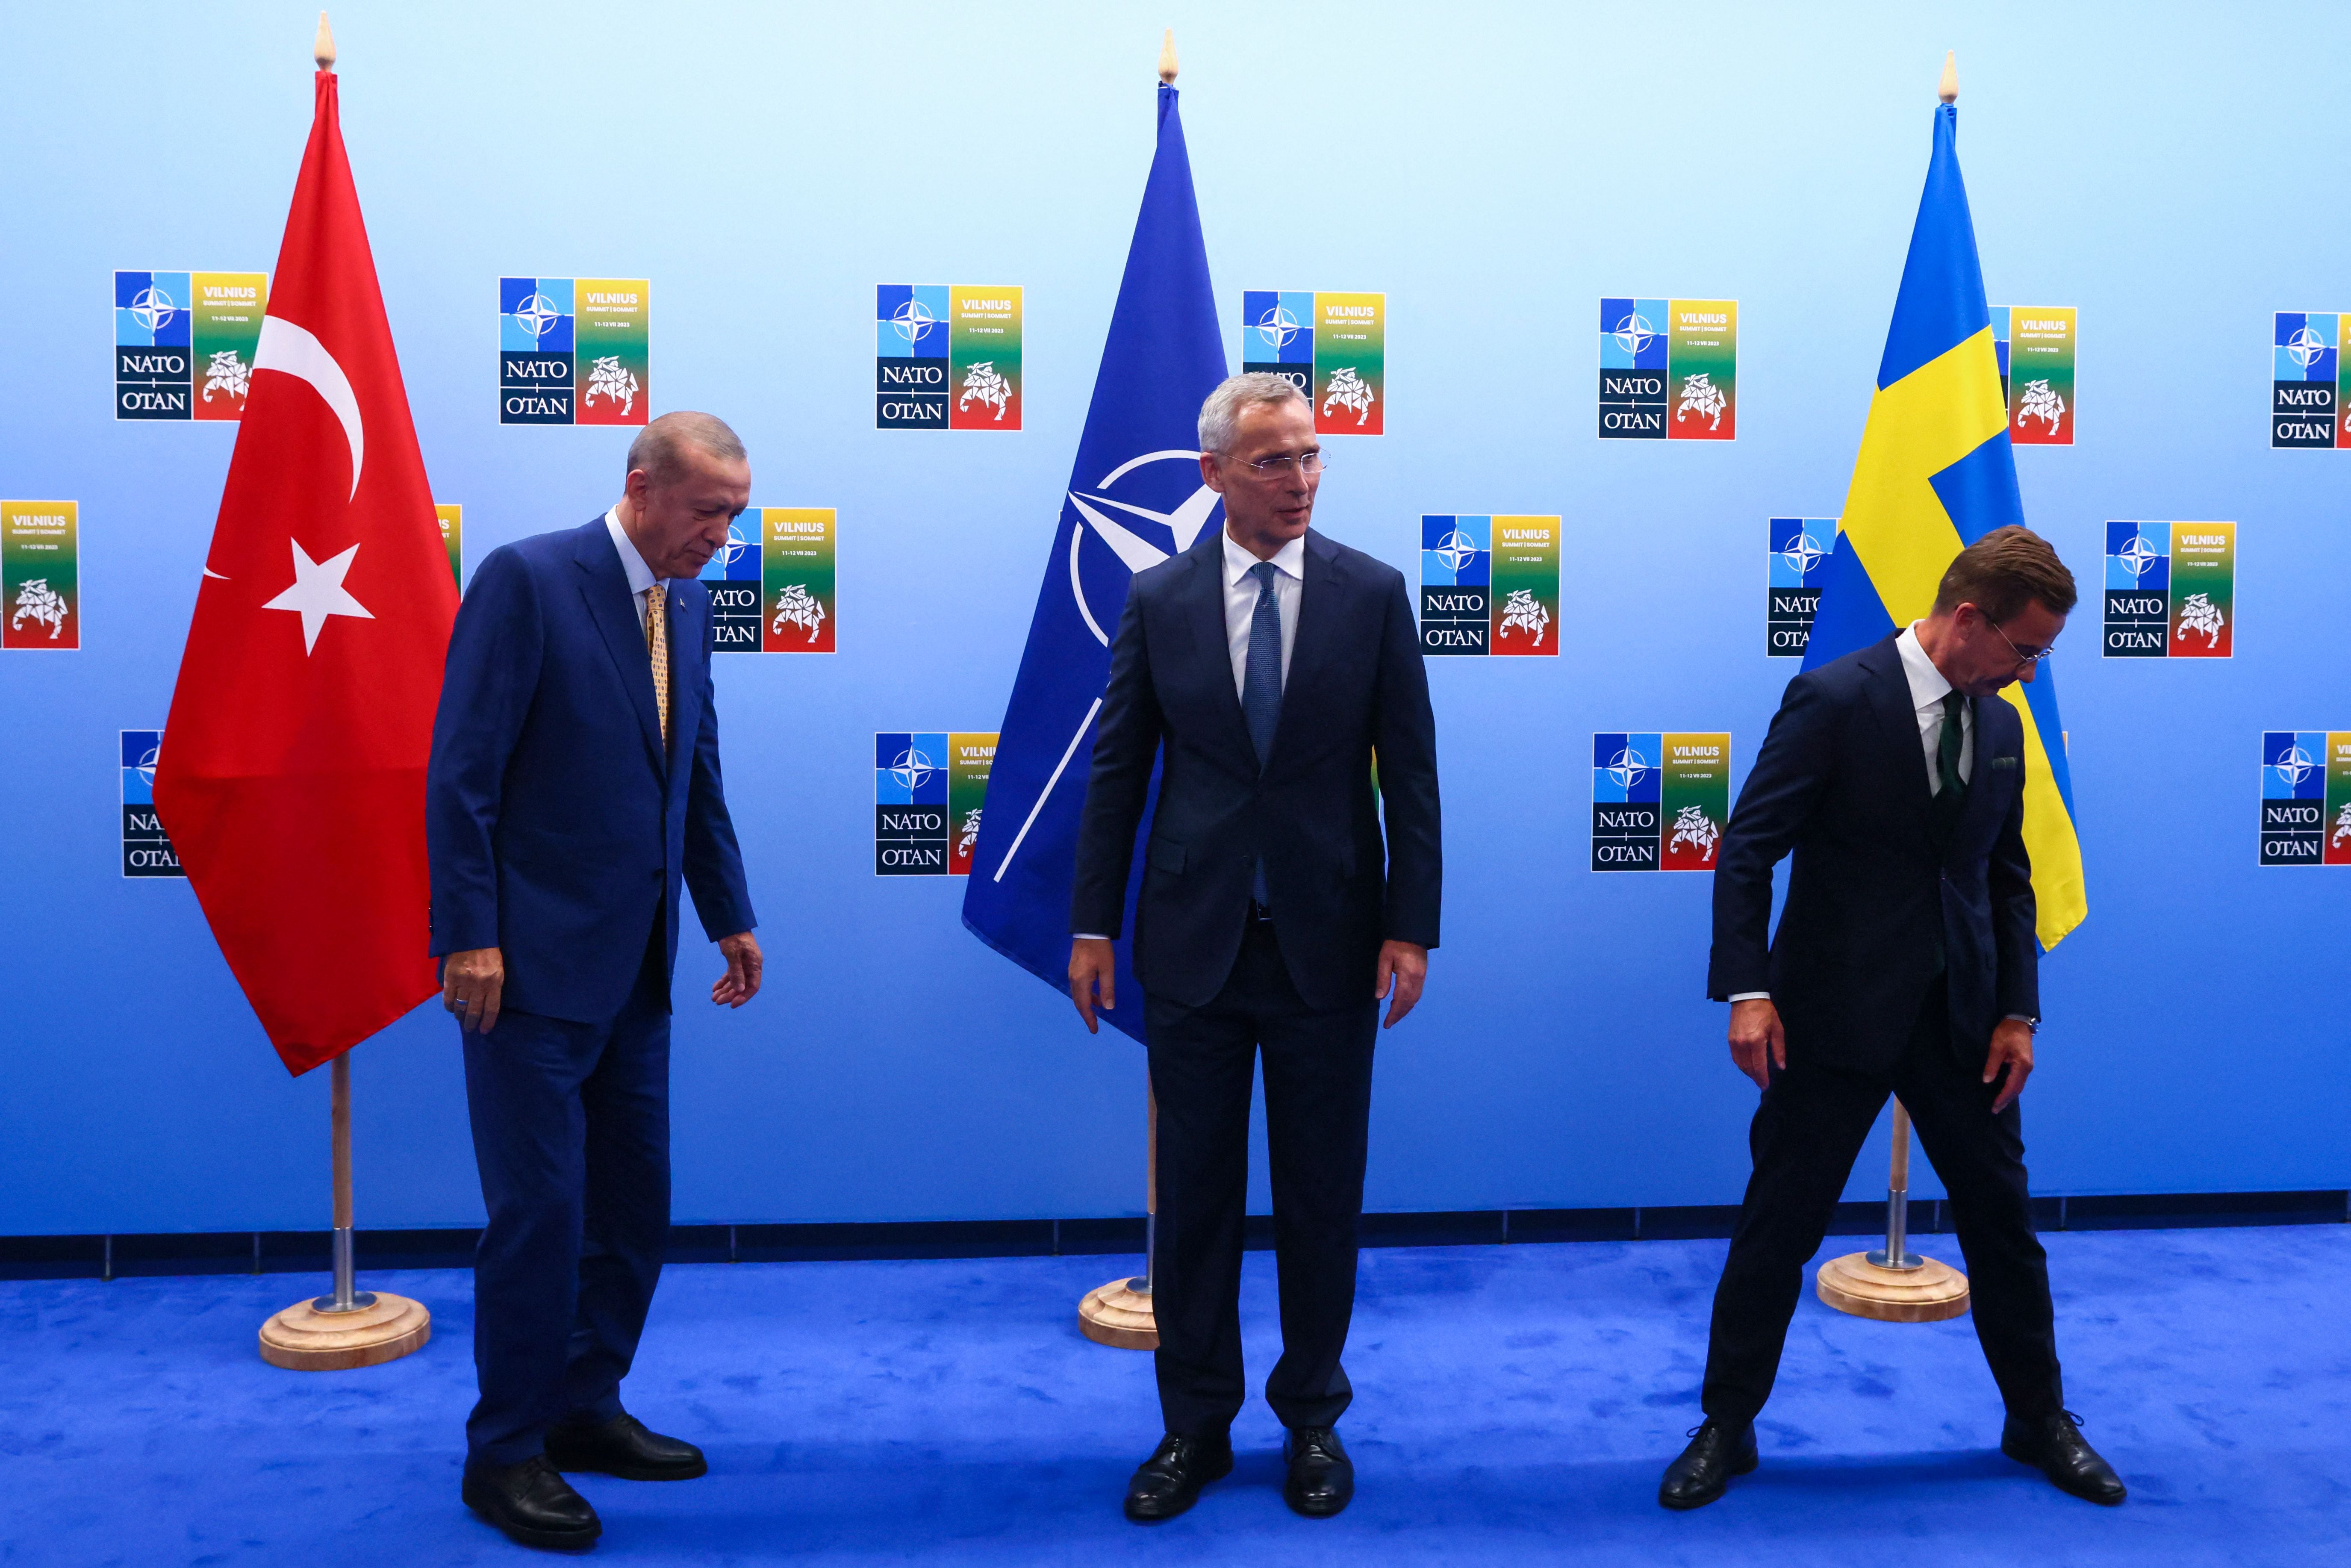 Turkish President Tayyip Erdogan, NATO Secretary-General Jens Stoltenberg and Swedish Prime Minister Ulf Kristersson prior to their meeting on the eve of a NATO summit